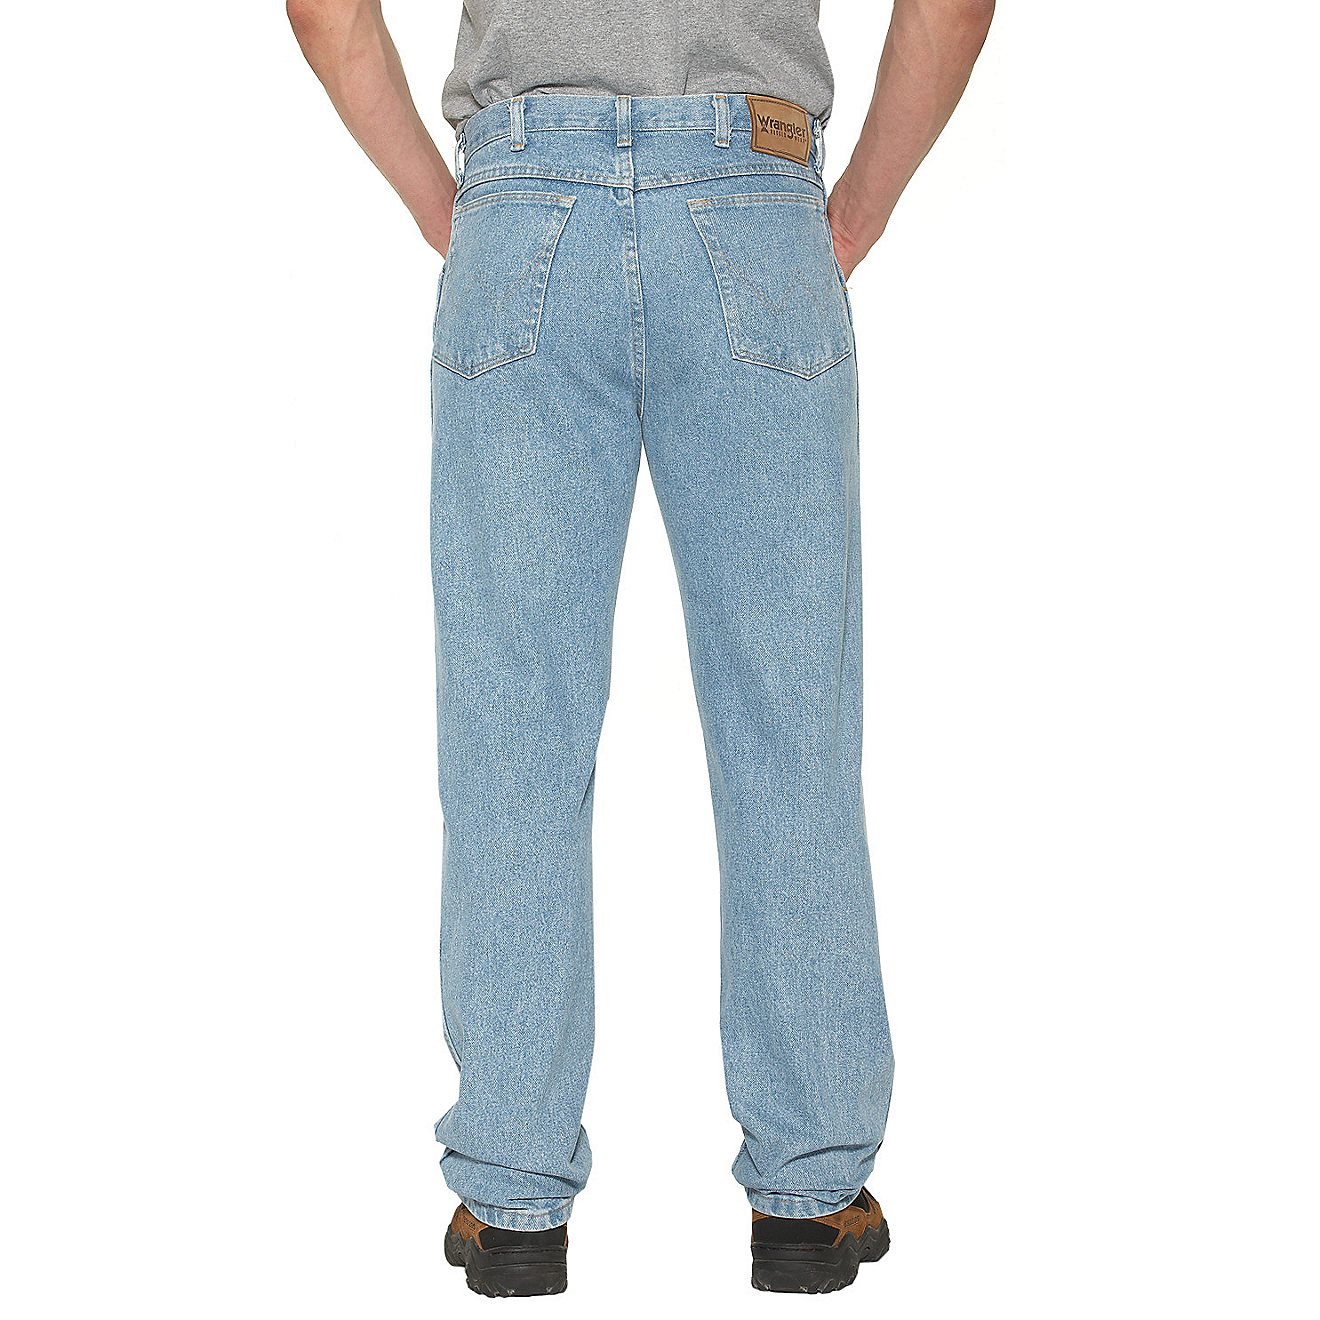 Wrangler Rugged Wear Men's Classic Fit Jean                                                                                      - view number 2